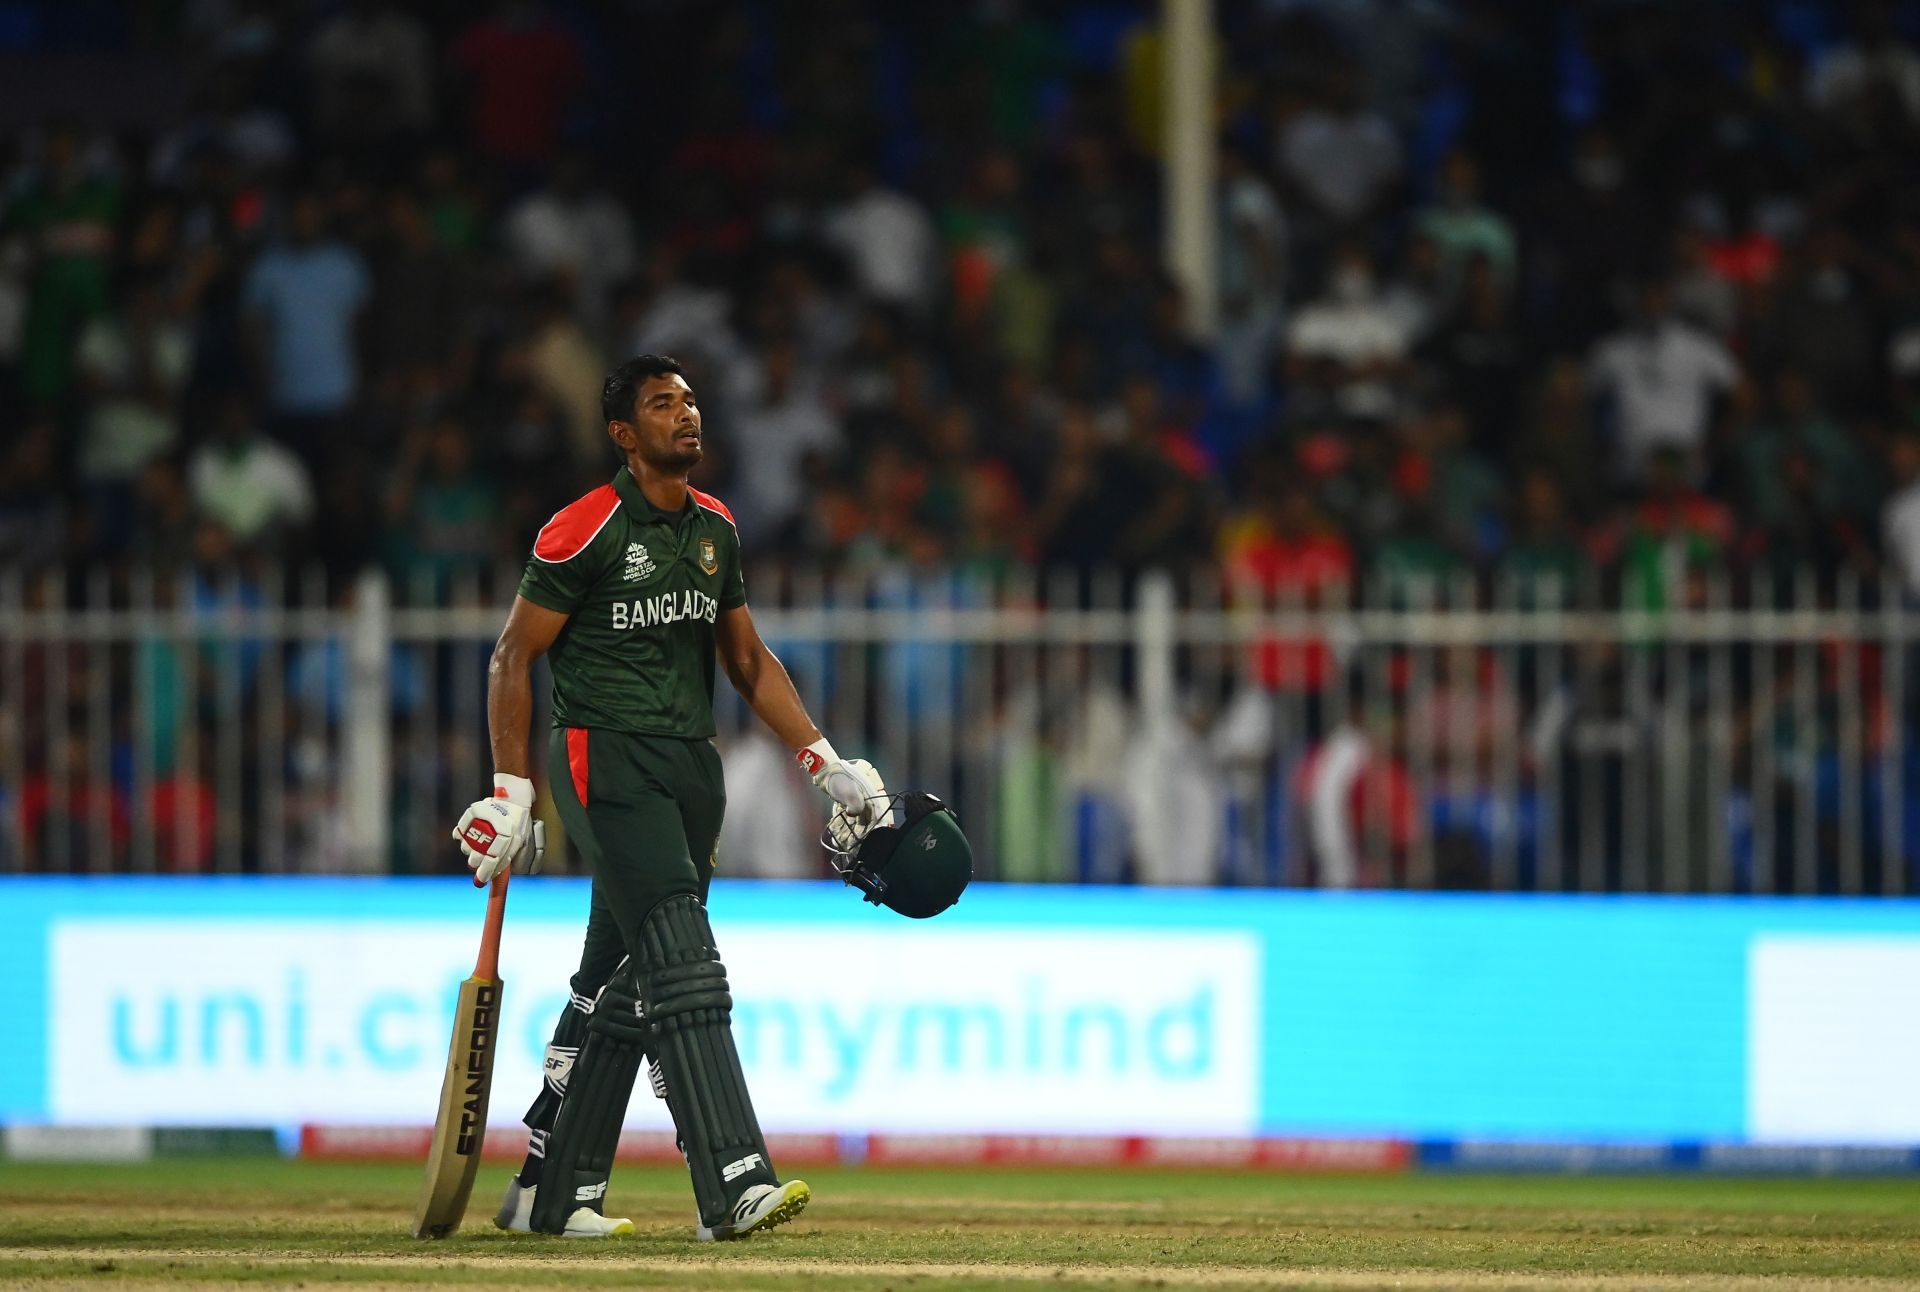 Bangladesh could not take advantage of the sub-continent conditions in the T20 World Cup in UAE